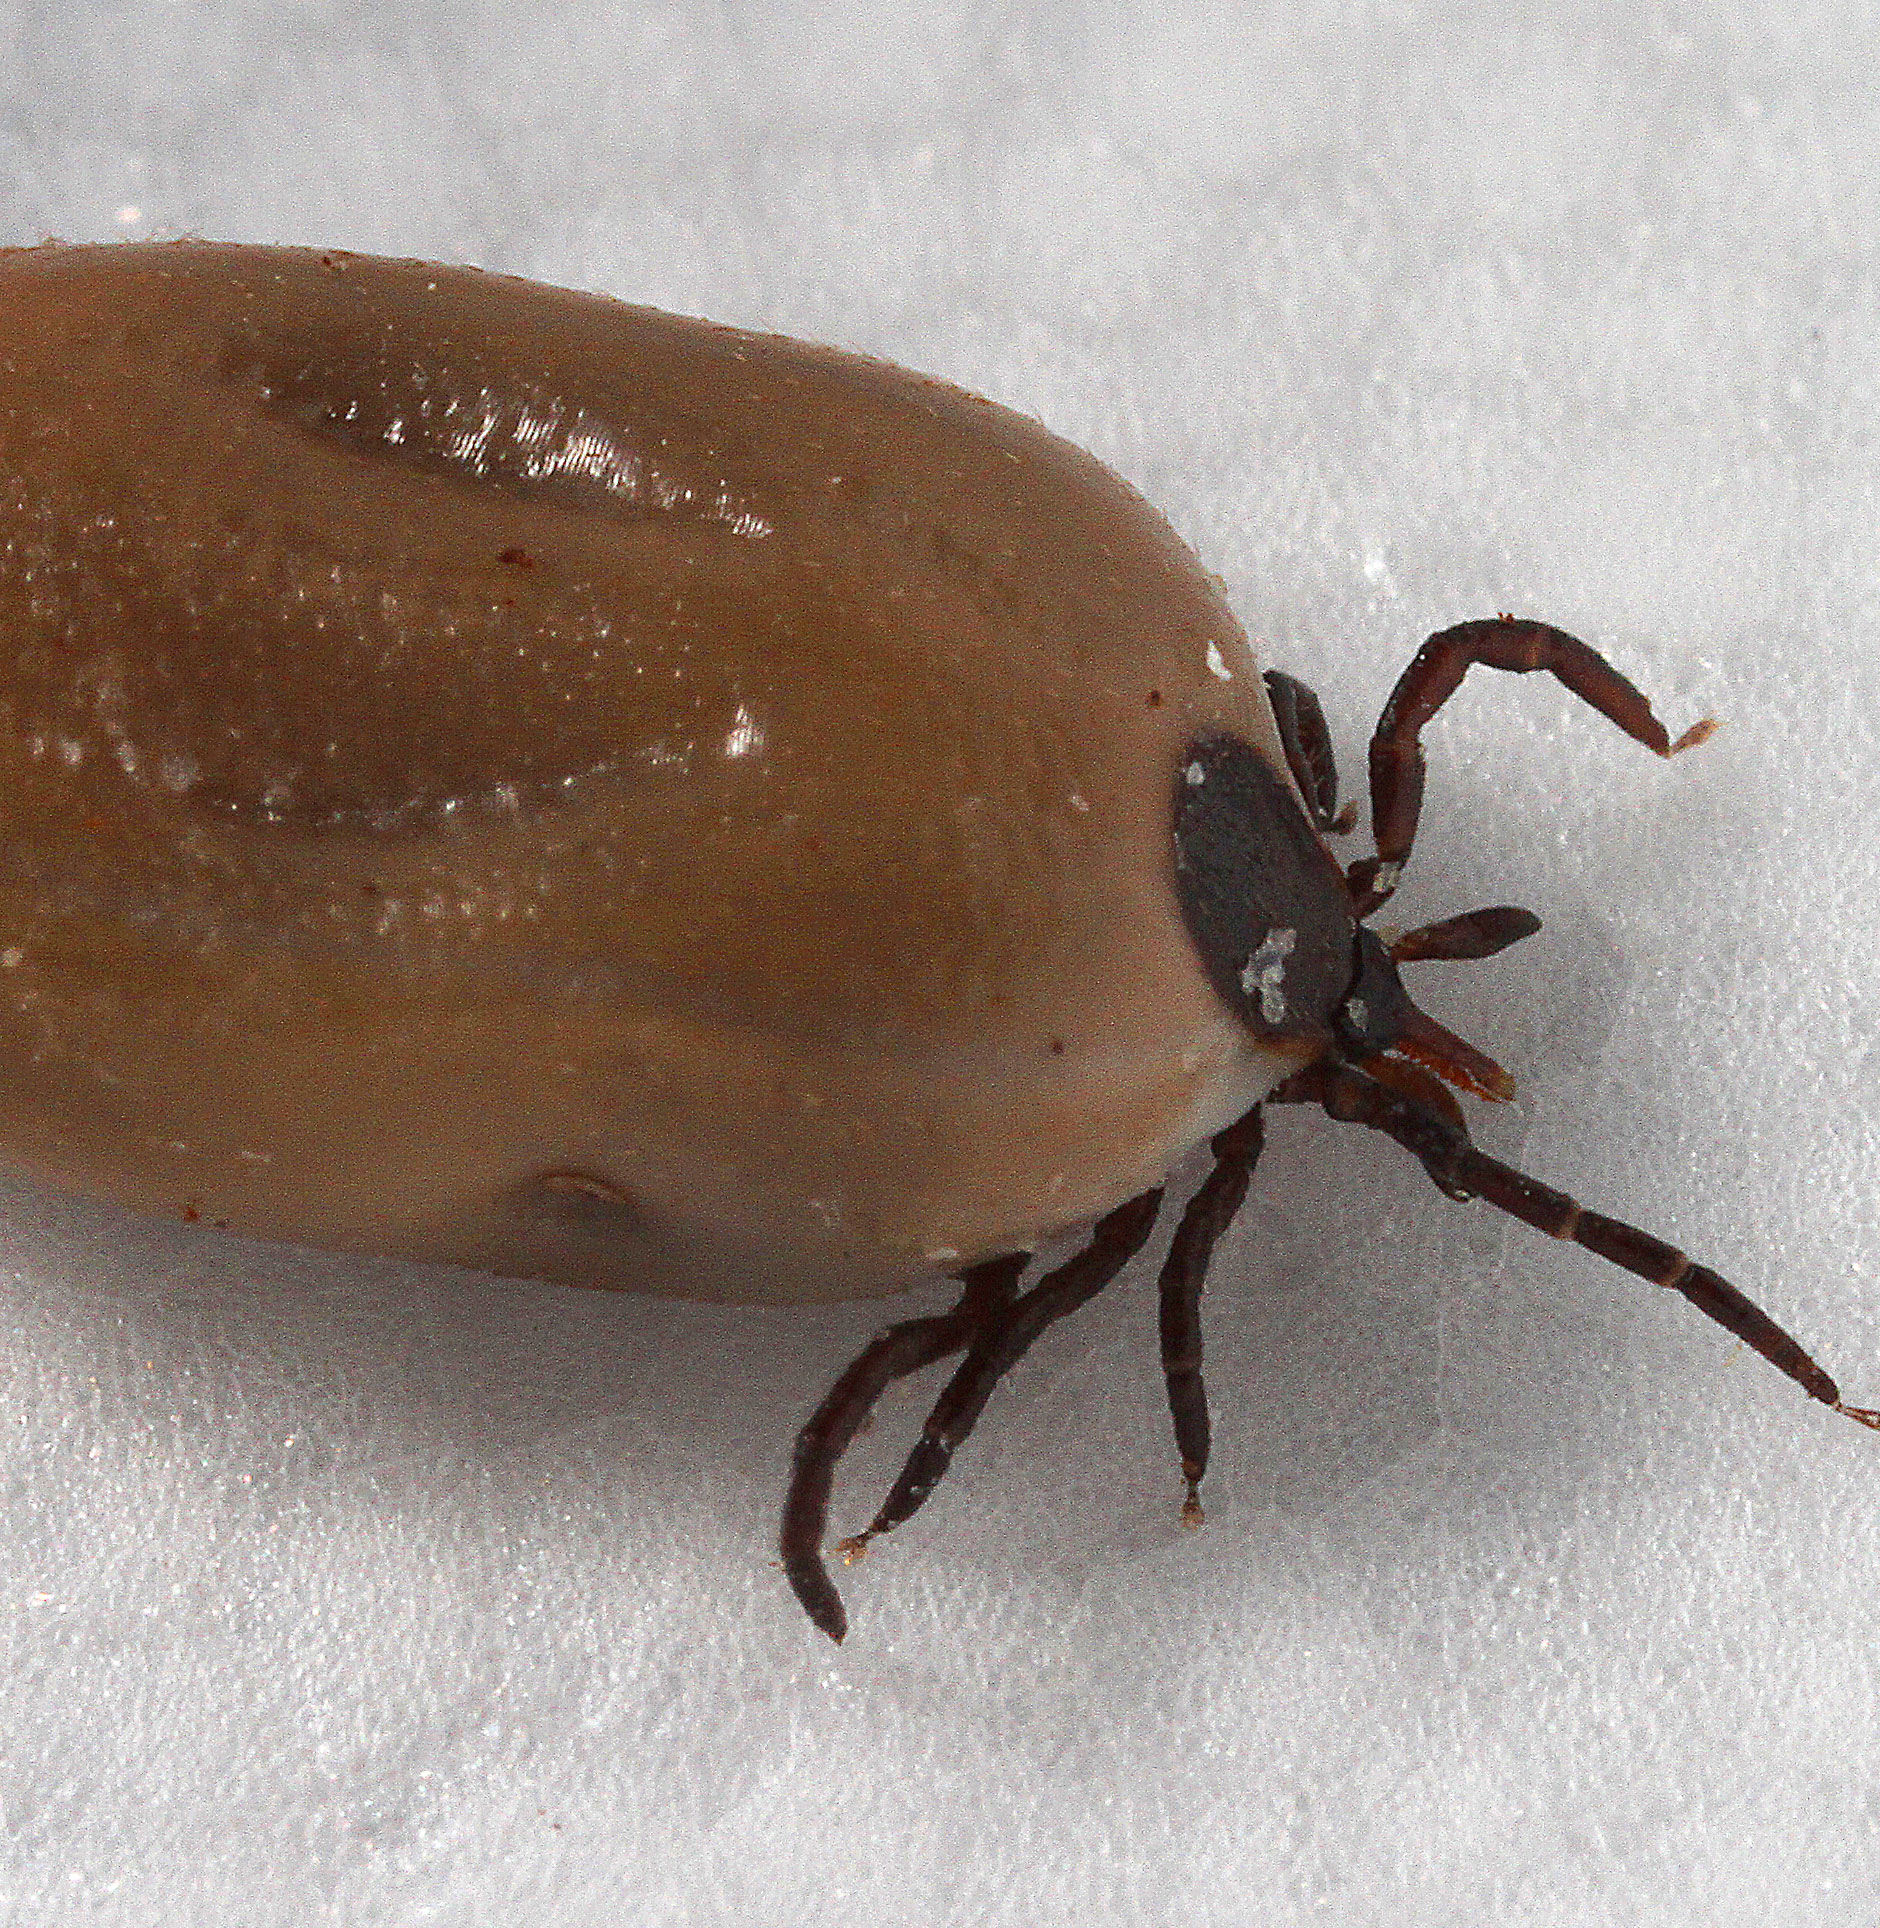 Image of a tick engorged with blood Thumbnail